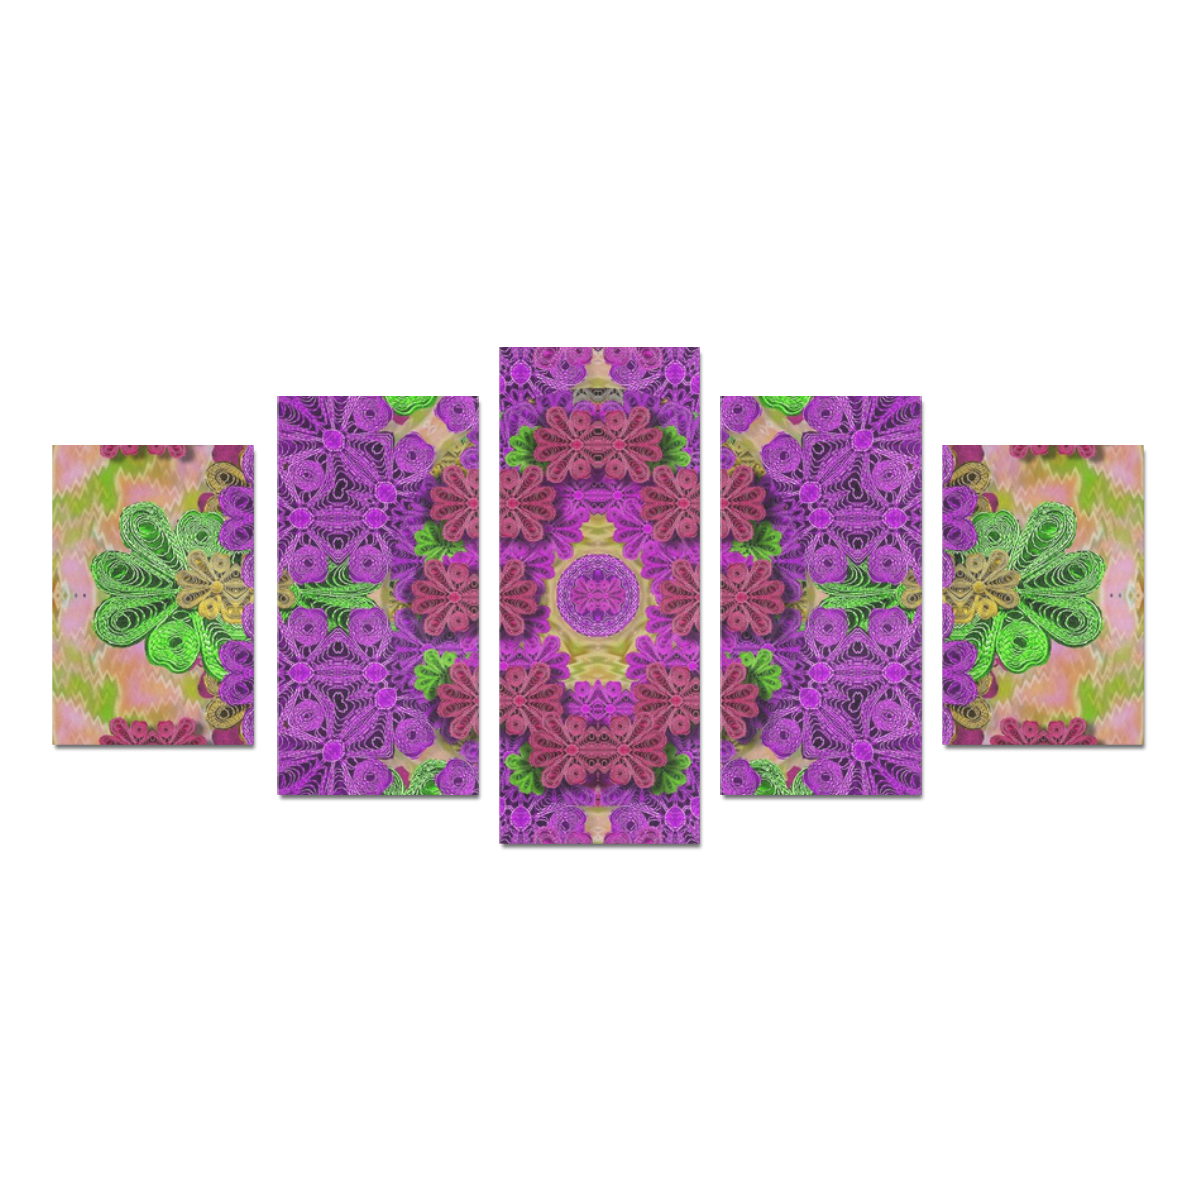 Rainbow and peacock mandala in heavy metal style Canvas Print Sets D (No Frame)